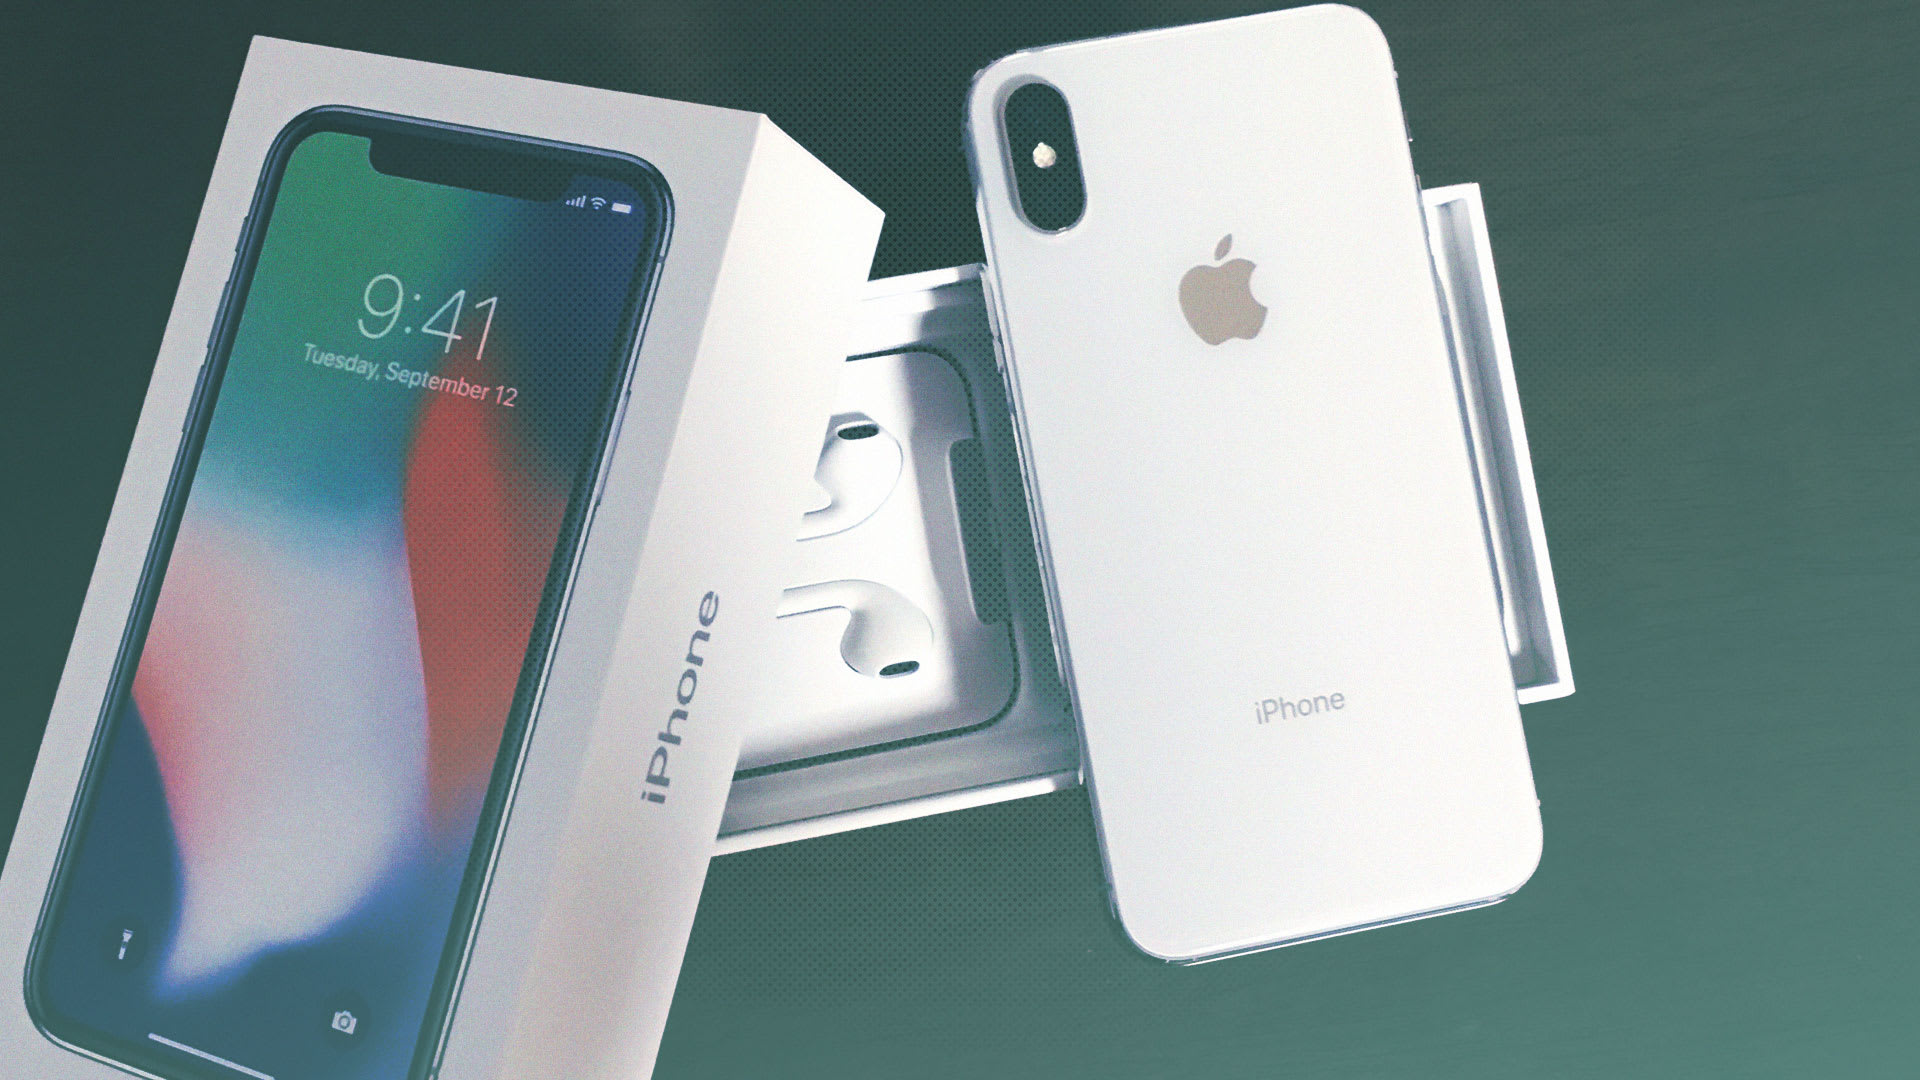 Source: Apple Will Produce Only 8 Million iPhone X Units In Q2